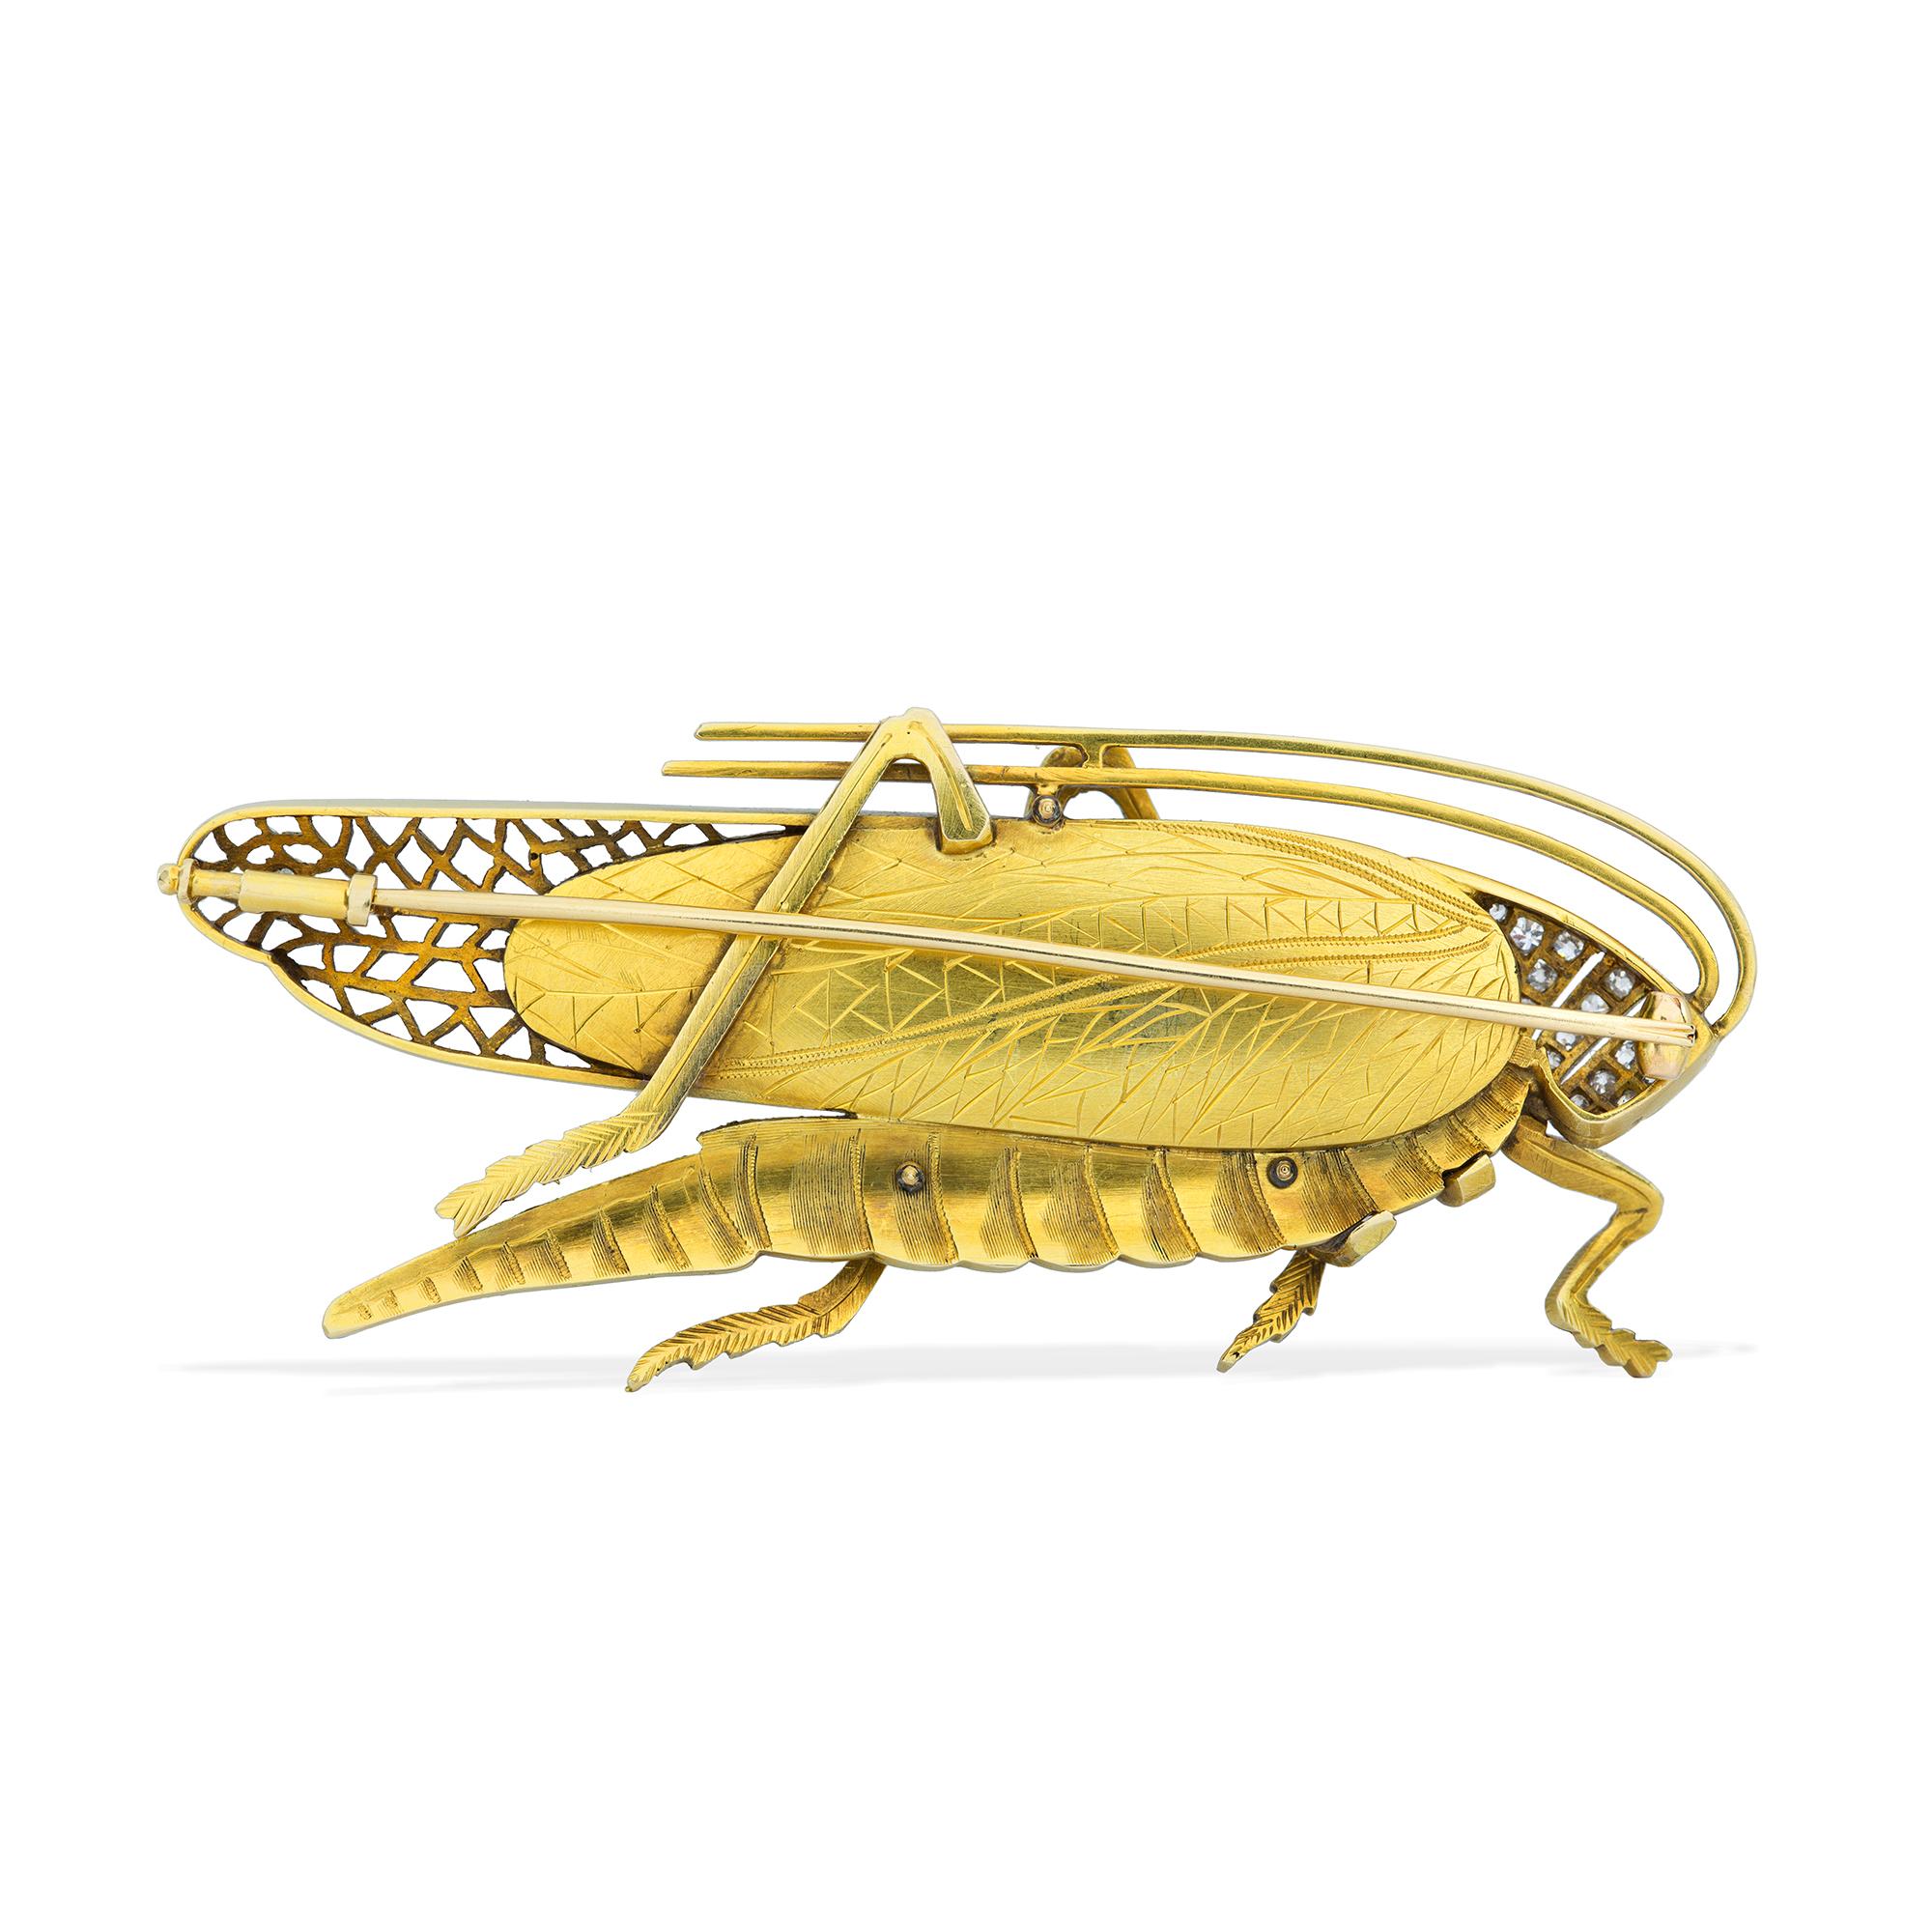 A vintage gold mounted grasshopper brooch, the body set with a mabe pearl and the head set with diamonds with ruby eye, all to a realistically carved gold body, circa 1930, measuring approximately 3.1x7.4cm, gross weight 23.8 grams.

An exquisitely